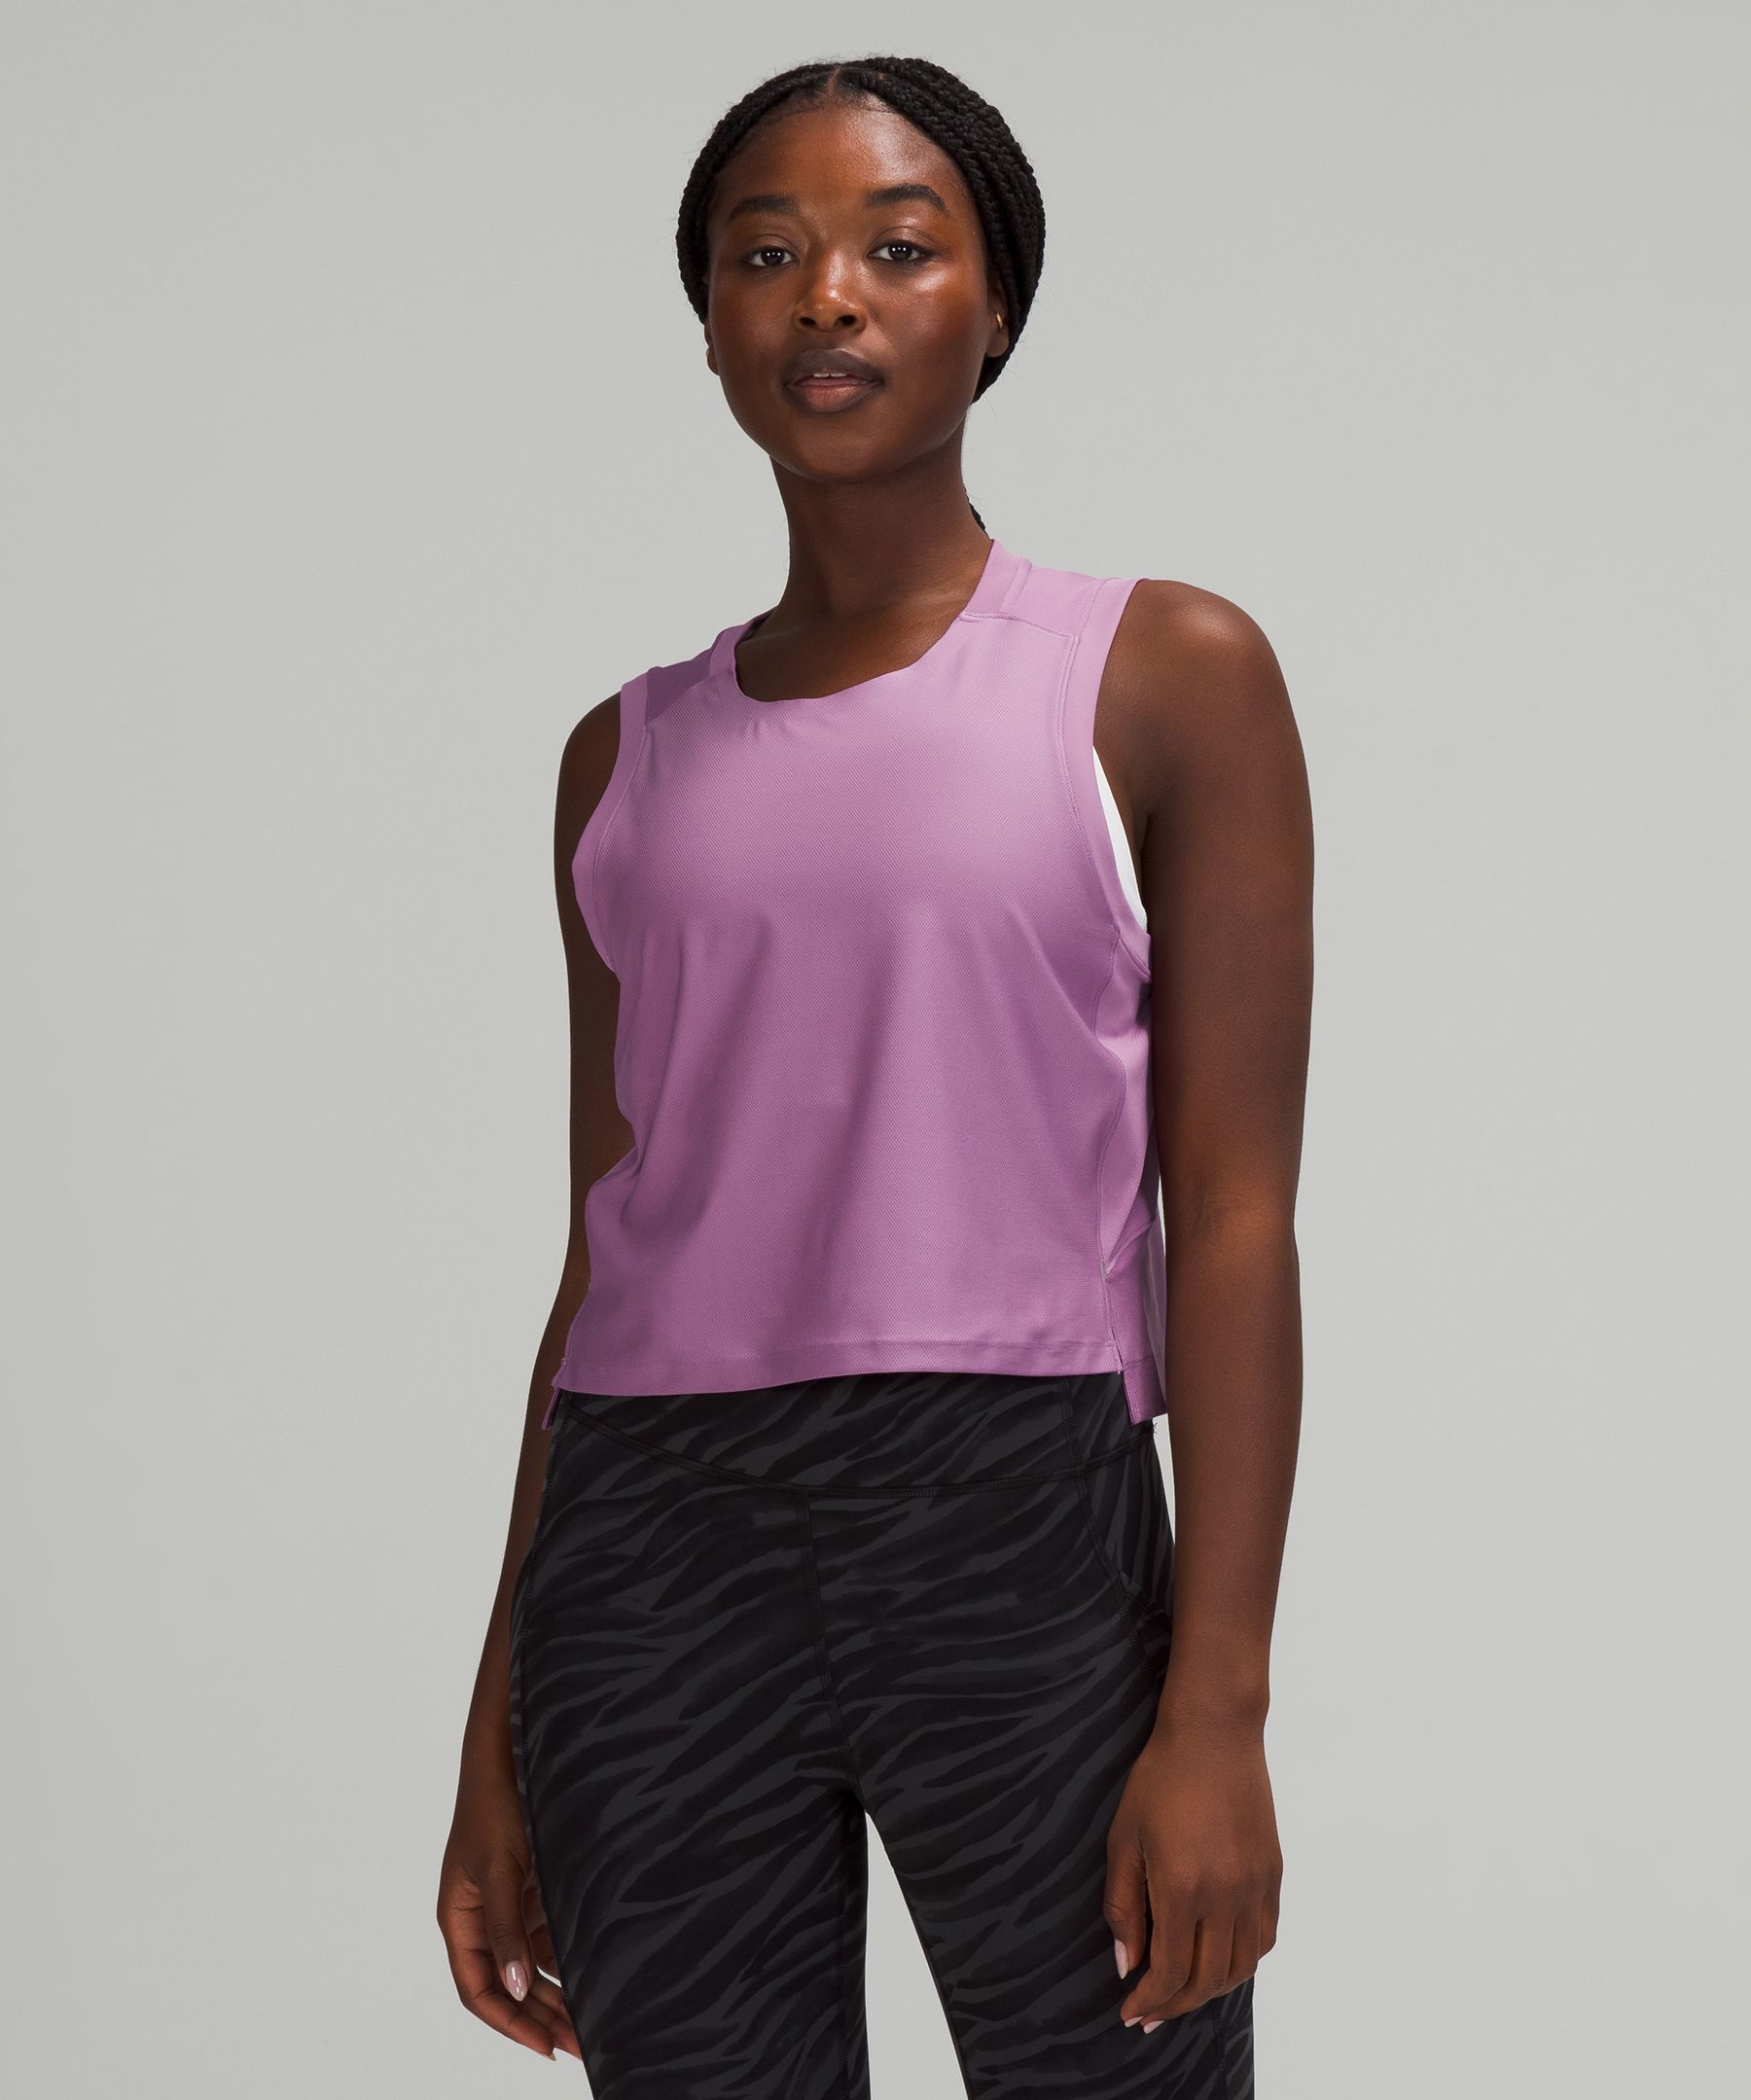 lululemon athletica Cropped Athletic Tank Tops for Women